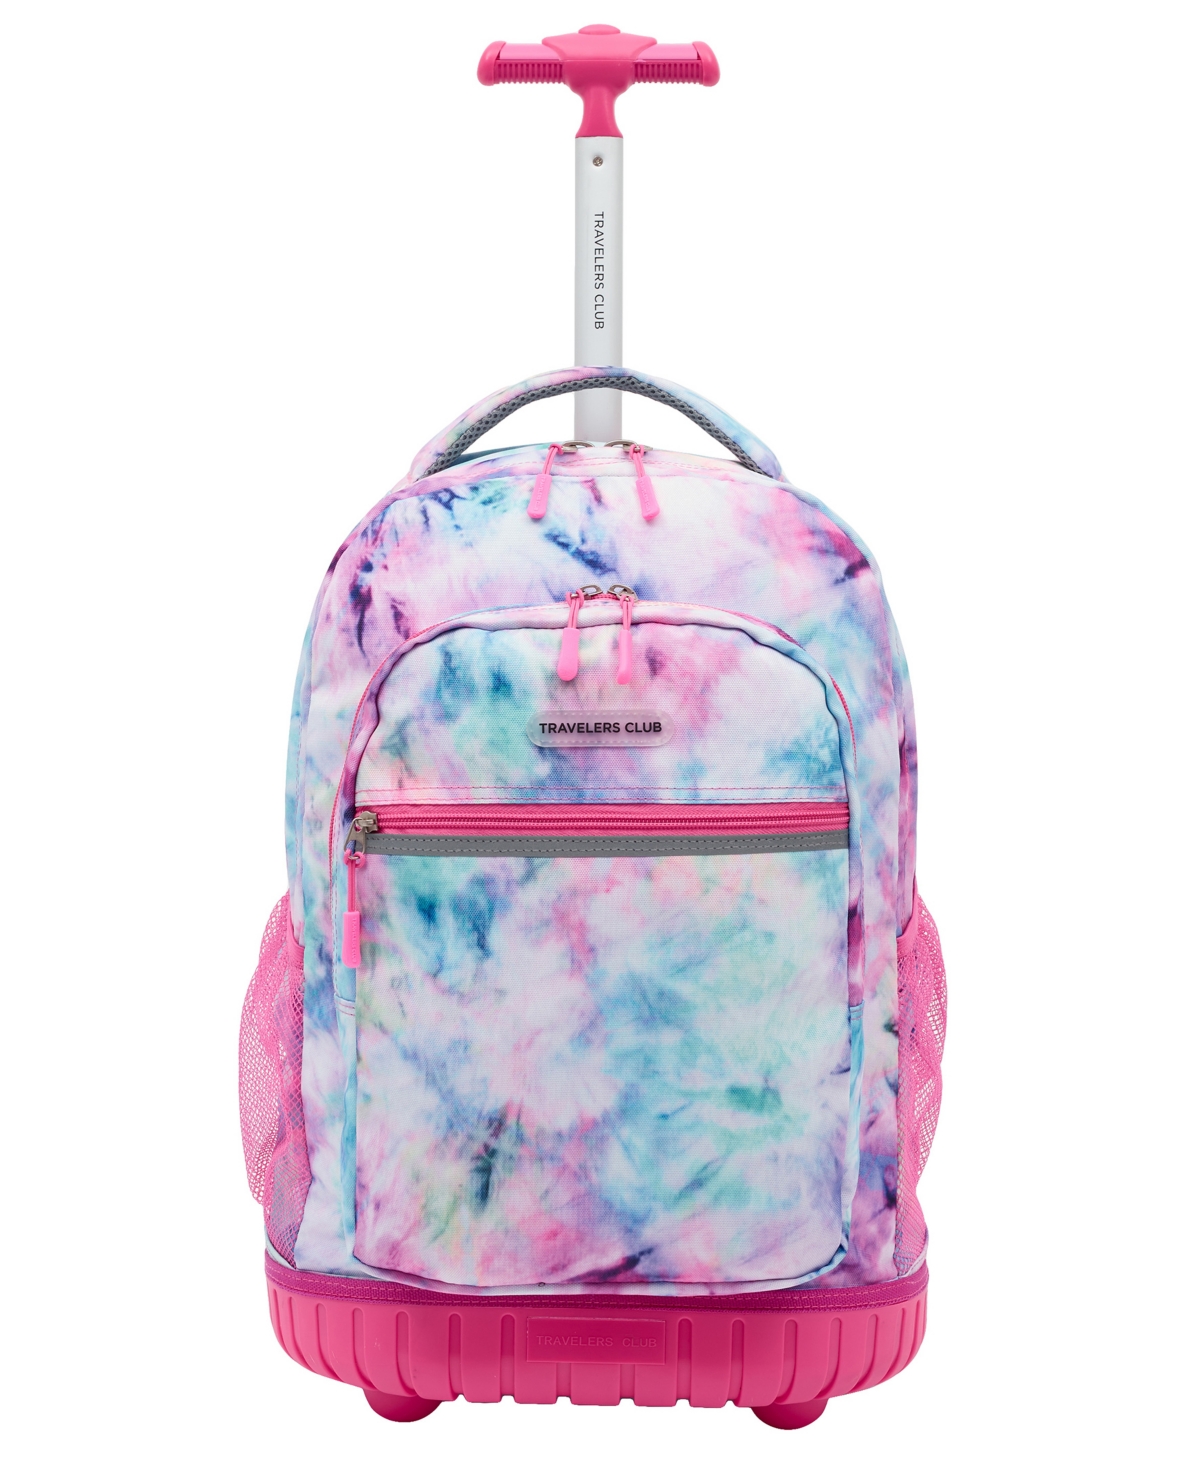 Travelers Club Finley Collection 18" Rolling Backpack In Tie Dye